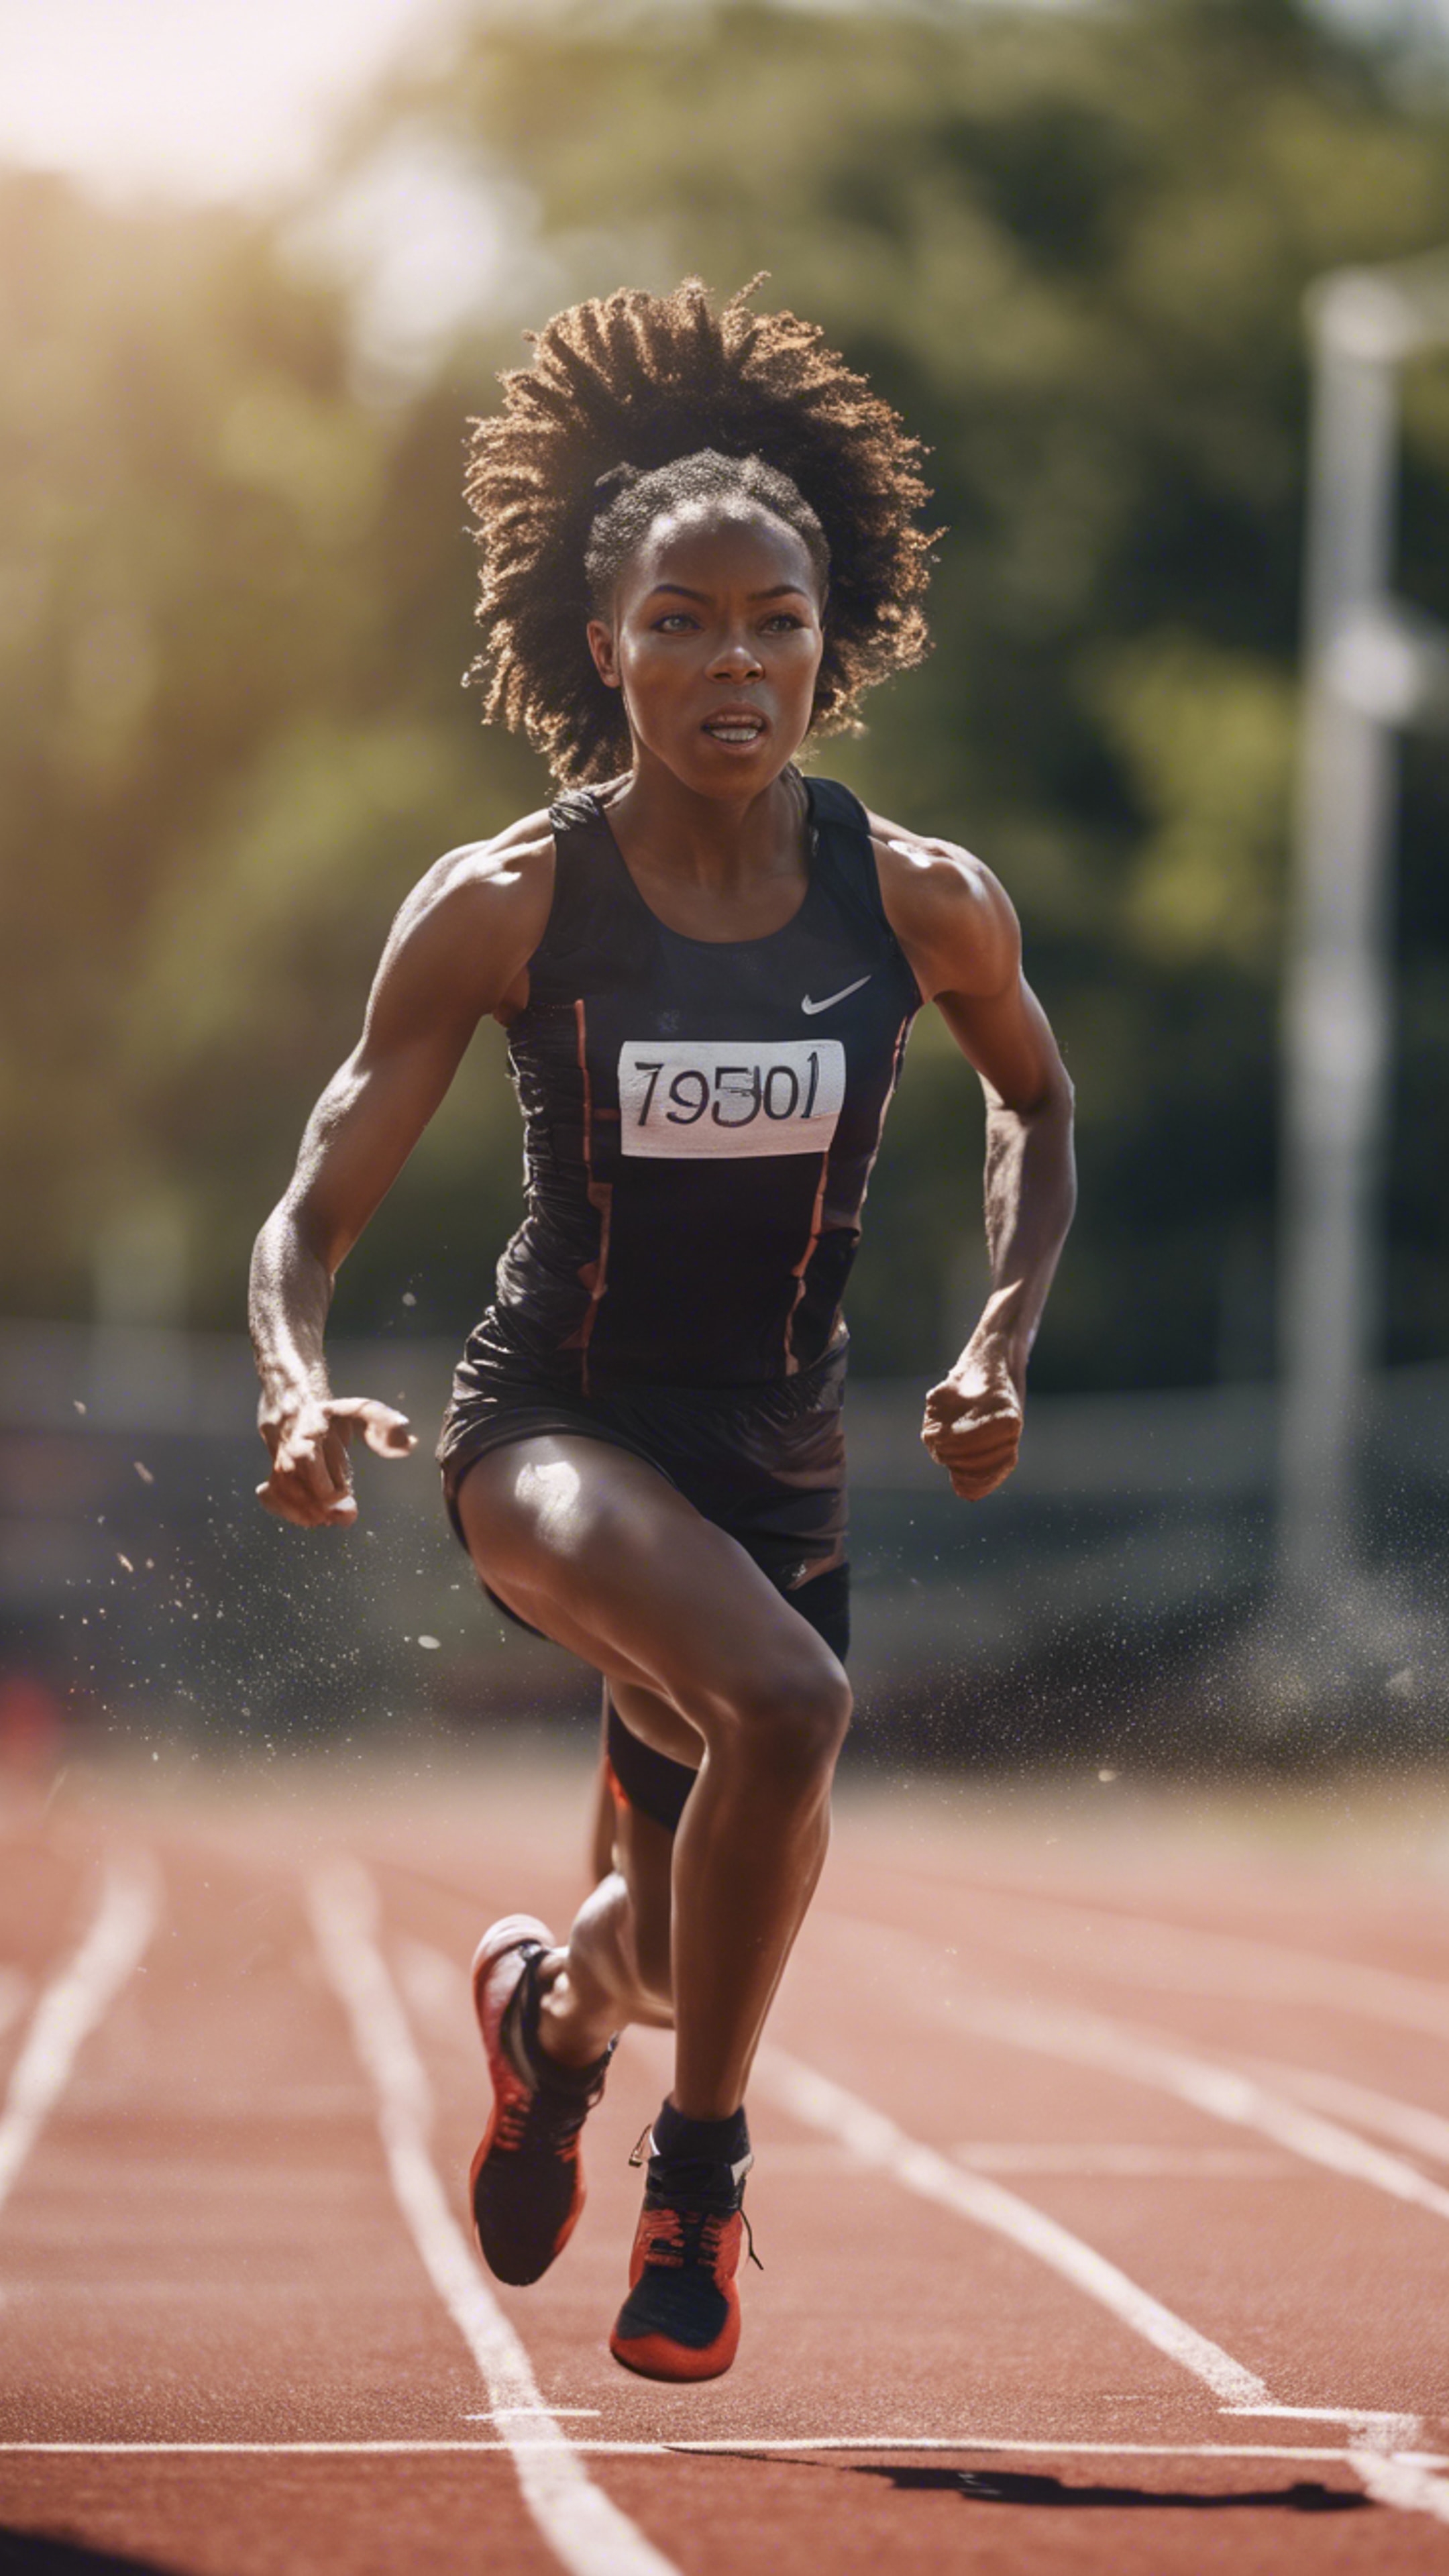 A dynamic image of a black girl engaging in competitive sprint, showing her vital energy. ورق الجدران[76eb5b44f4a84b498fc2]